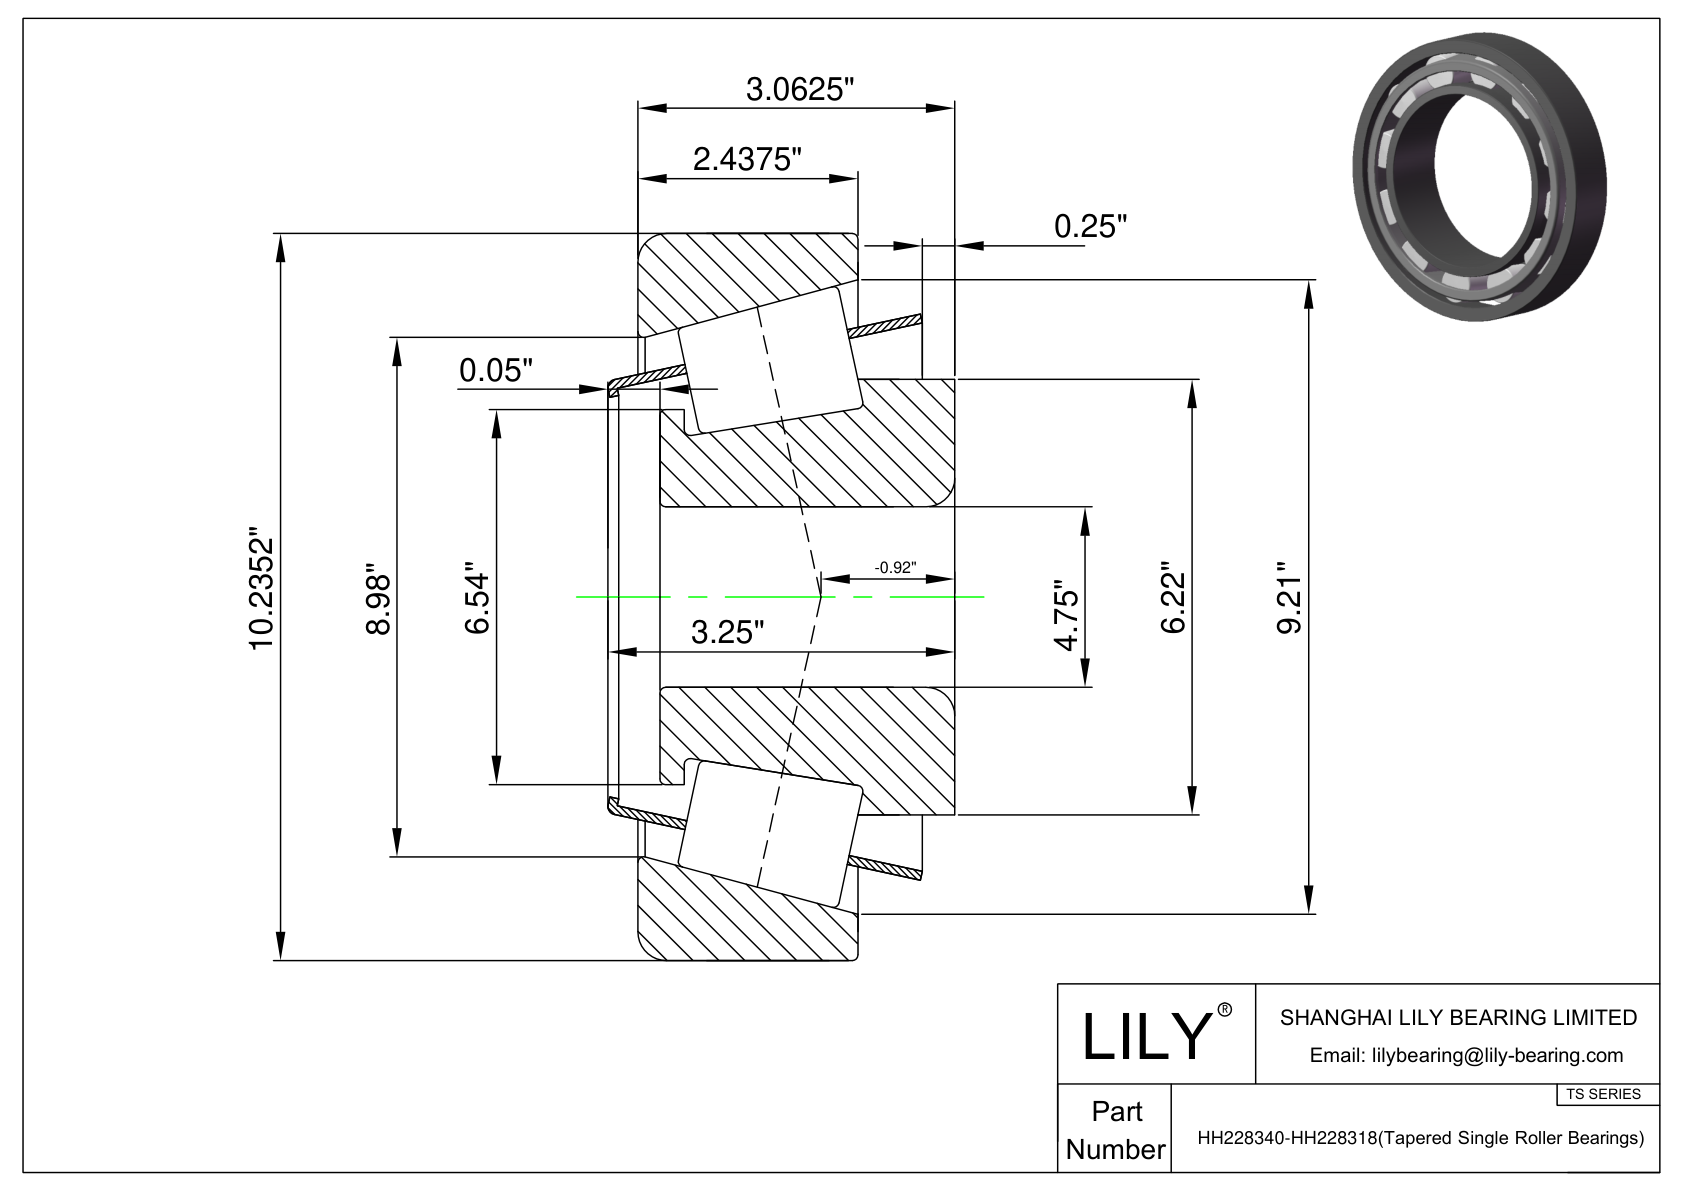 HH228340-HH228318 TS (Tapered Single Roller Bearings) (Imperial) cad drawing